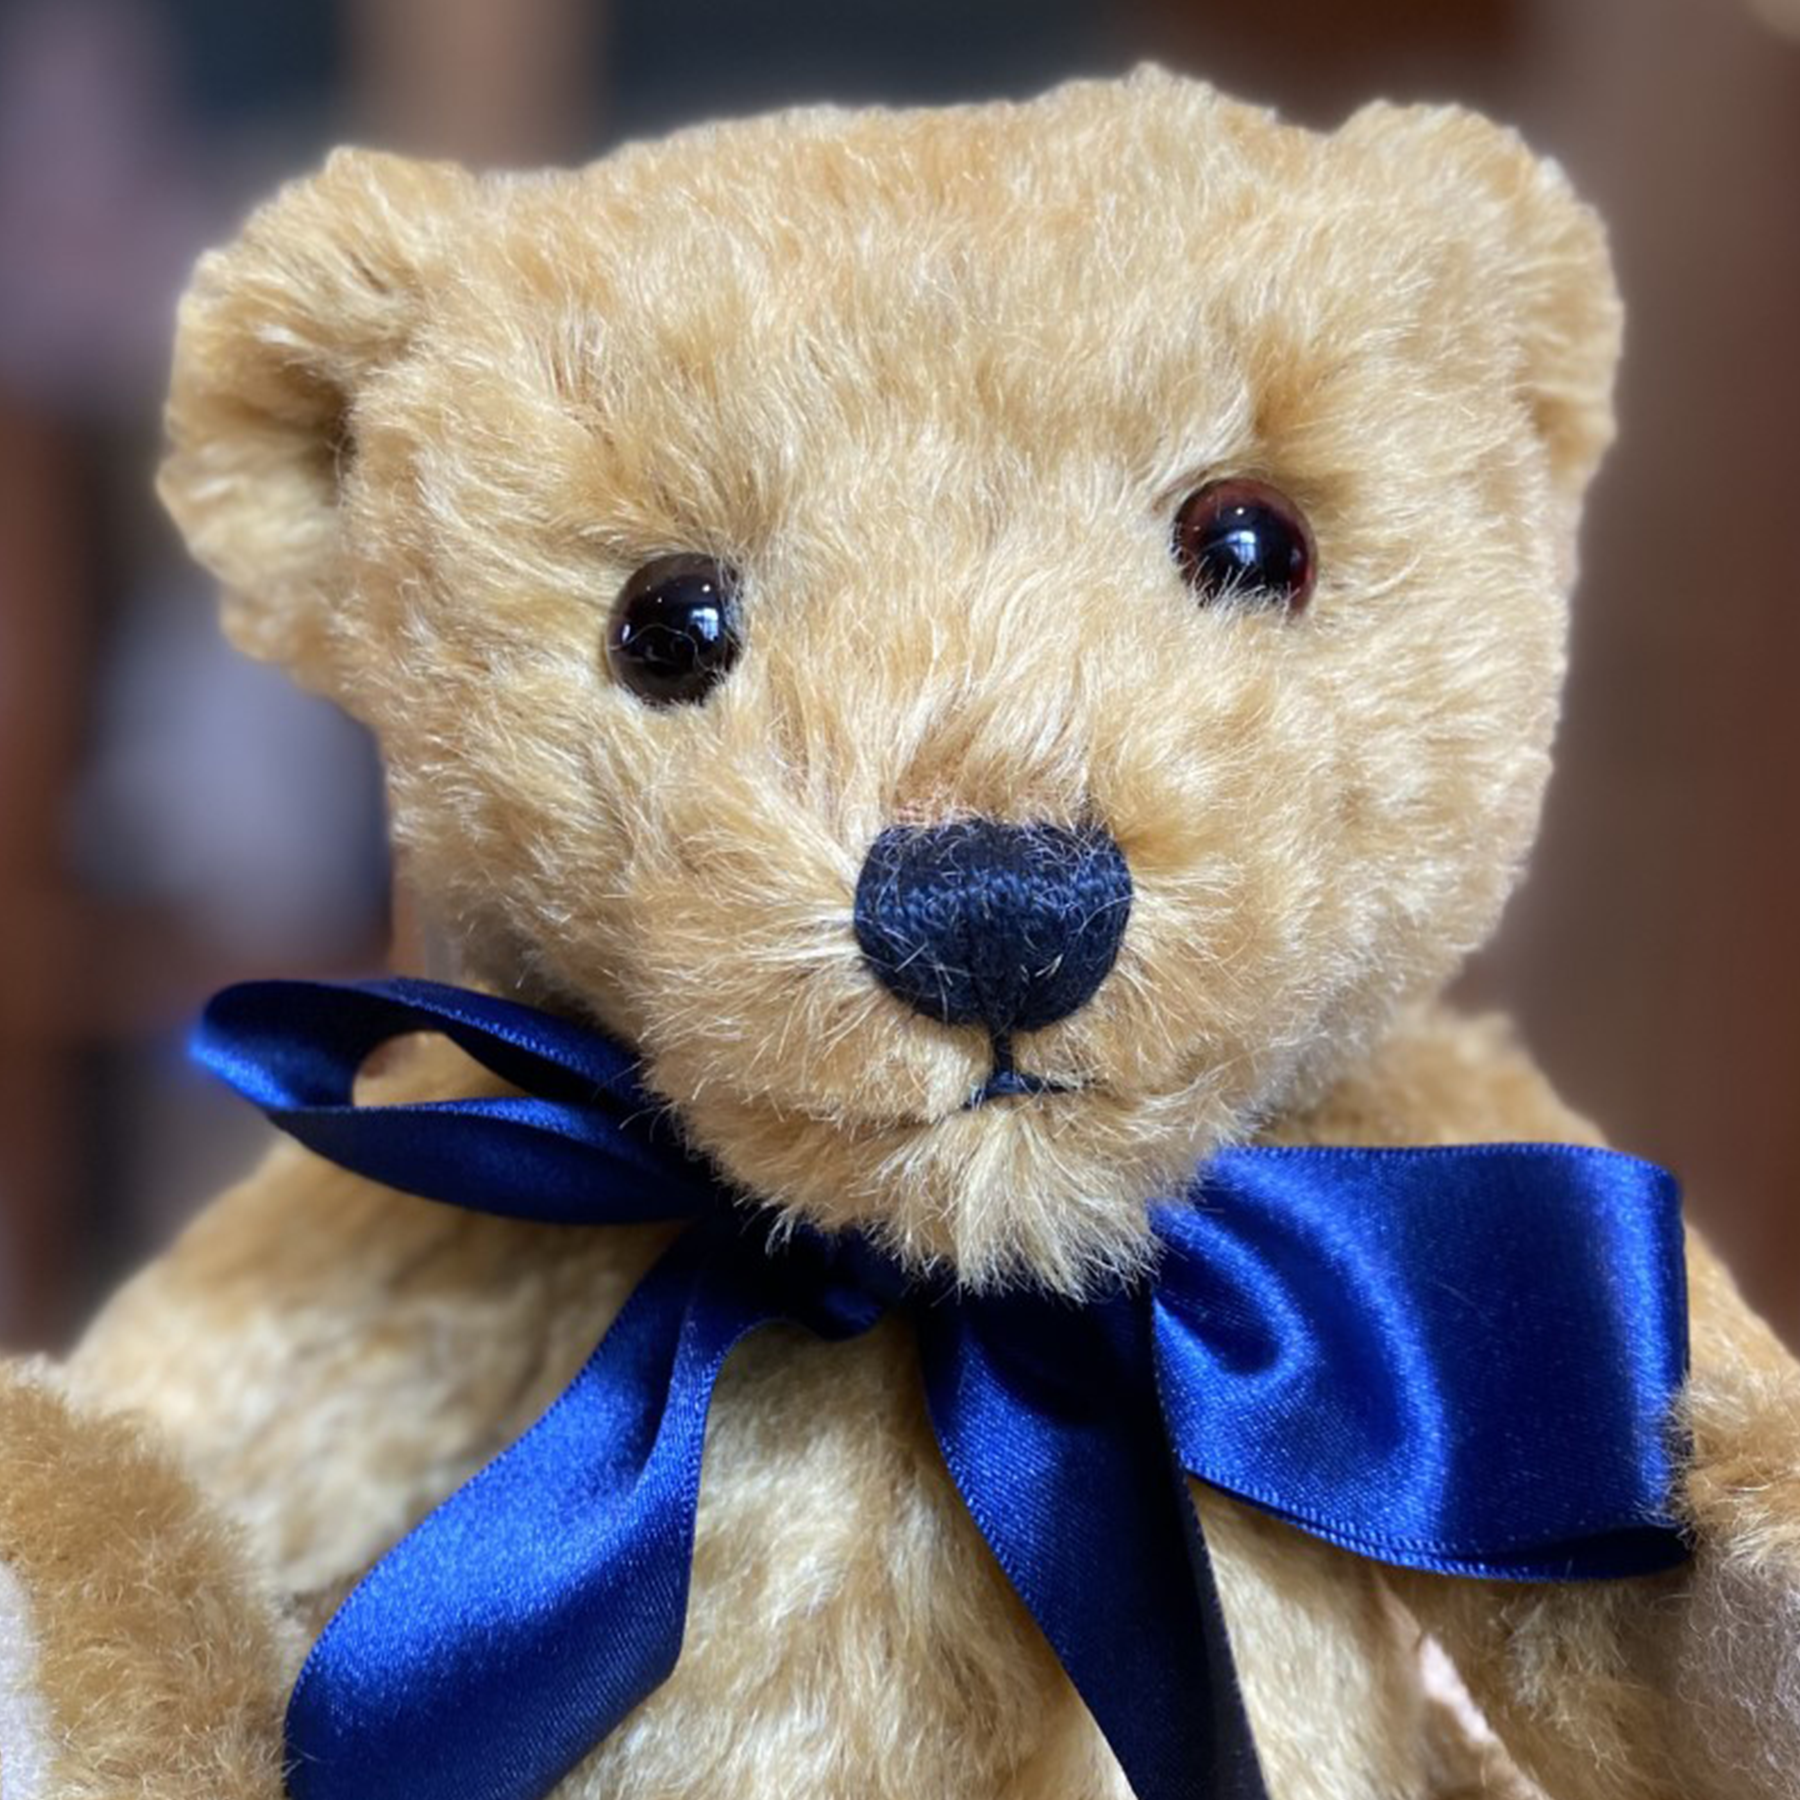 Crafted from wonderfully soft, rich golden mohair, Oxford's rotund shape and characterful dark brown eyes are guaranteed to warm hearts across the generations. His colours coordinate perfectly with dark sand wool felt paws and a splendid navy blue satin bow to finish.